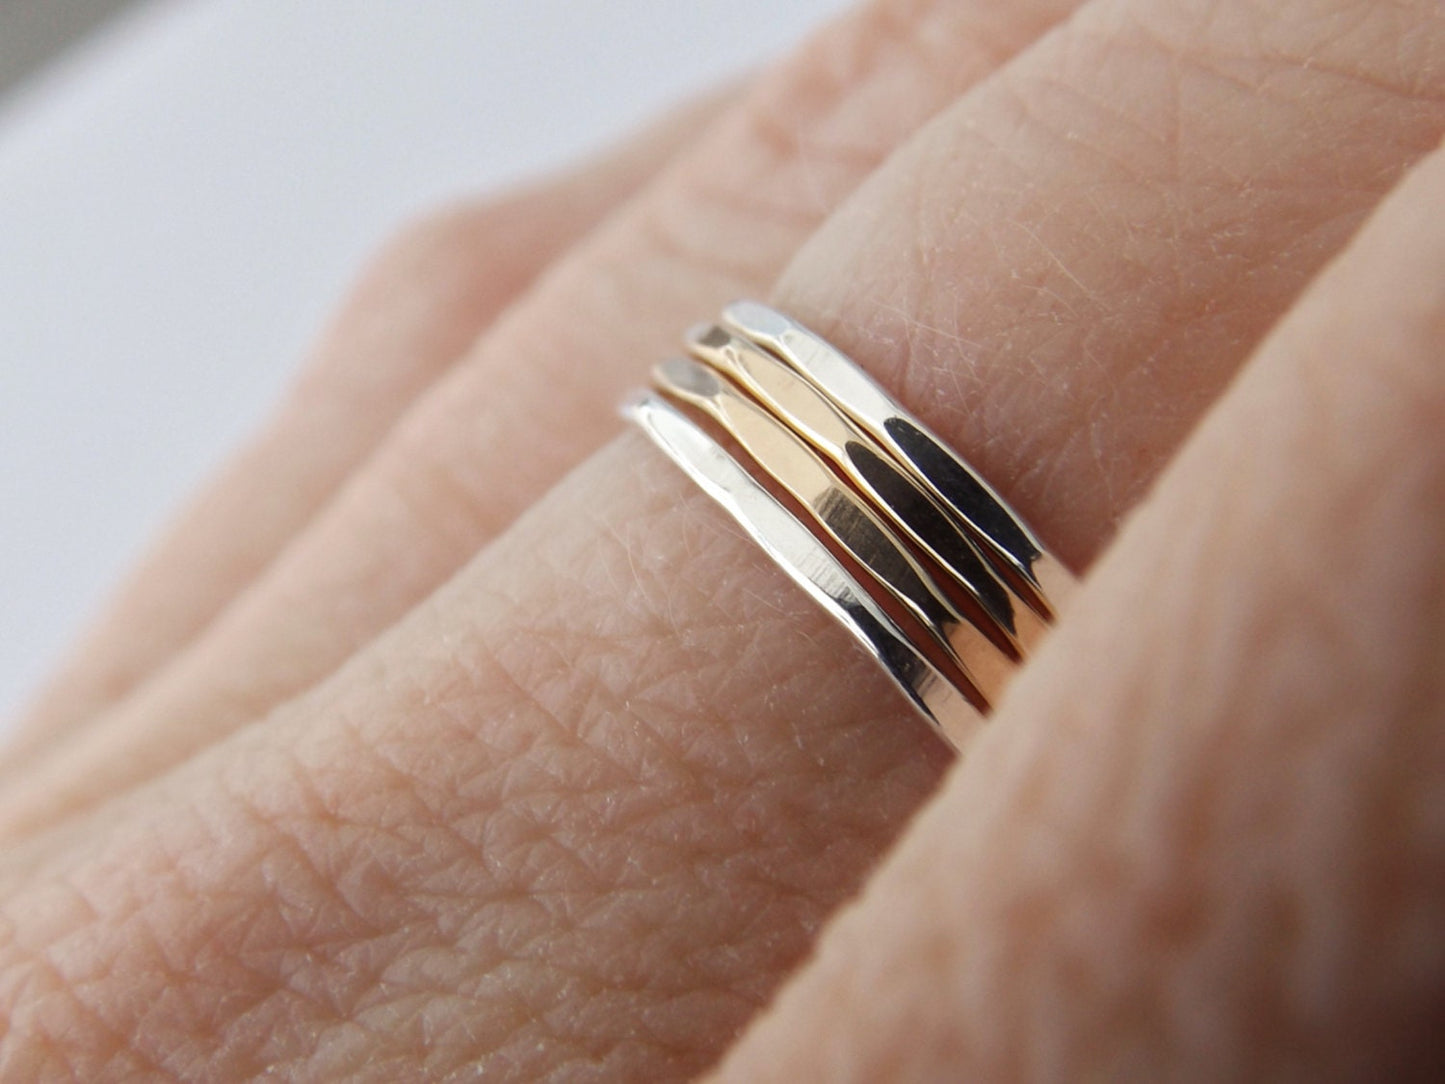 1 Super Skinny Stacking Ring, Knuckle Ring, Thumb Ring, Gold Ring, Stacking Ring, Hammered Ring, Skinny Ring, Thin Rings, Textured Ring